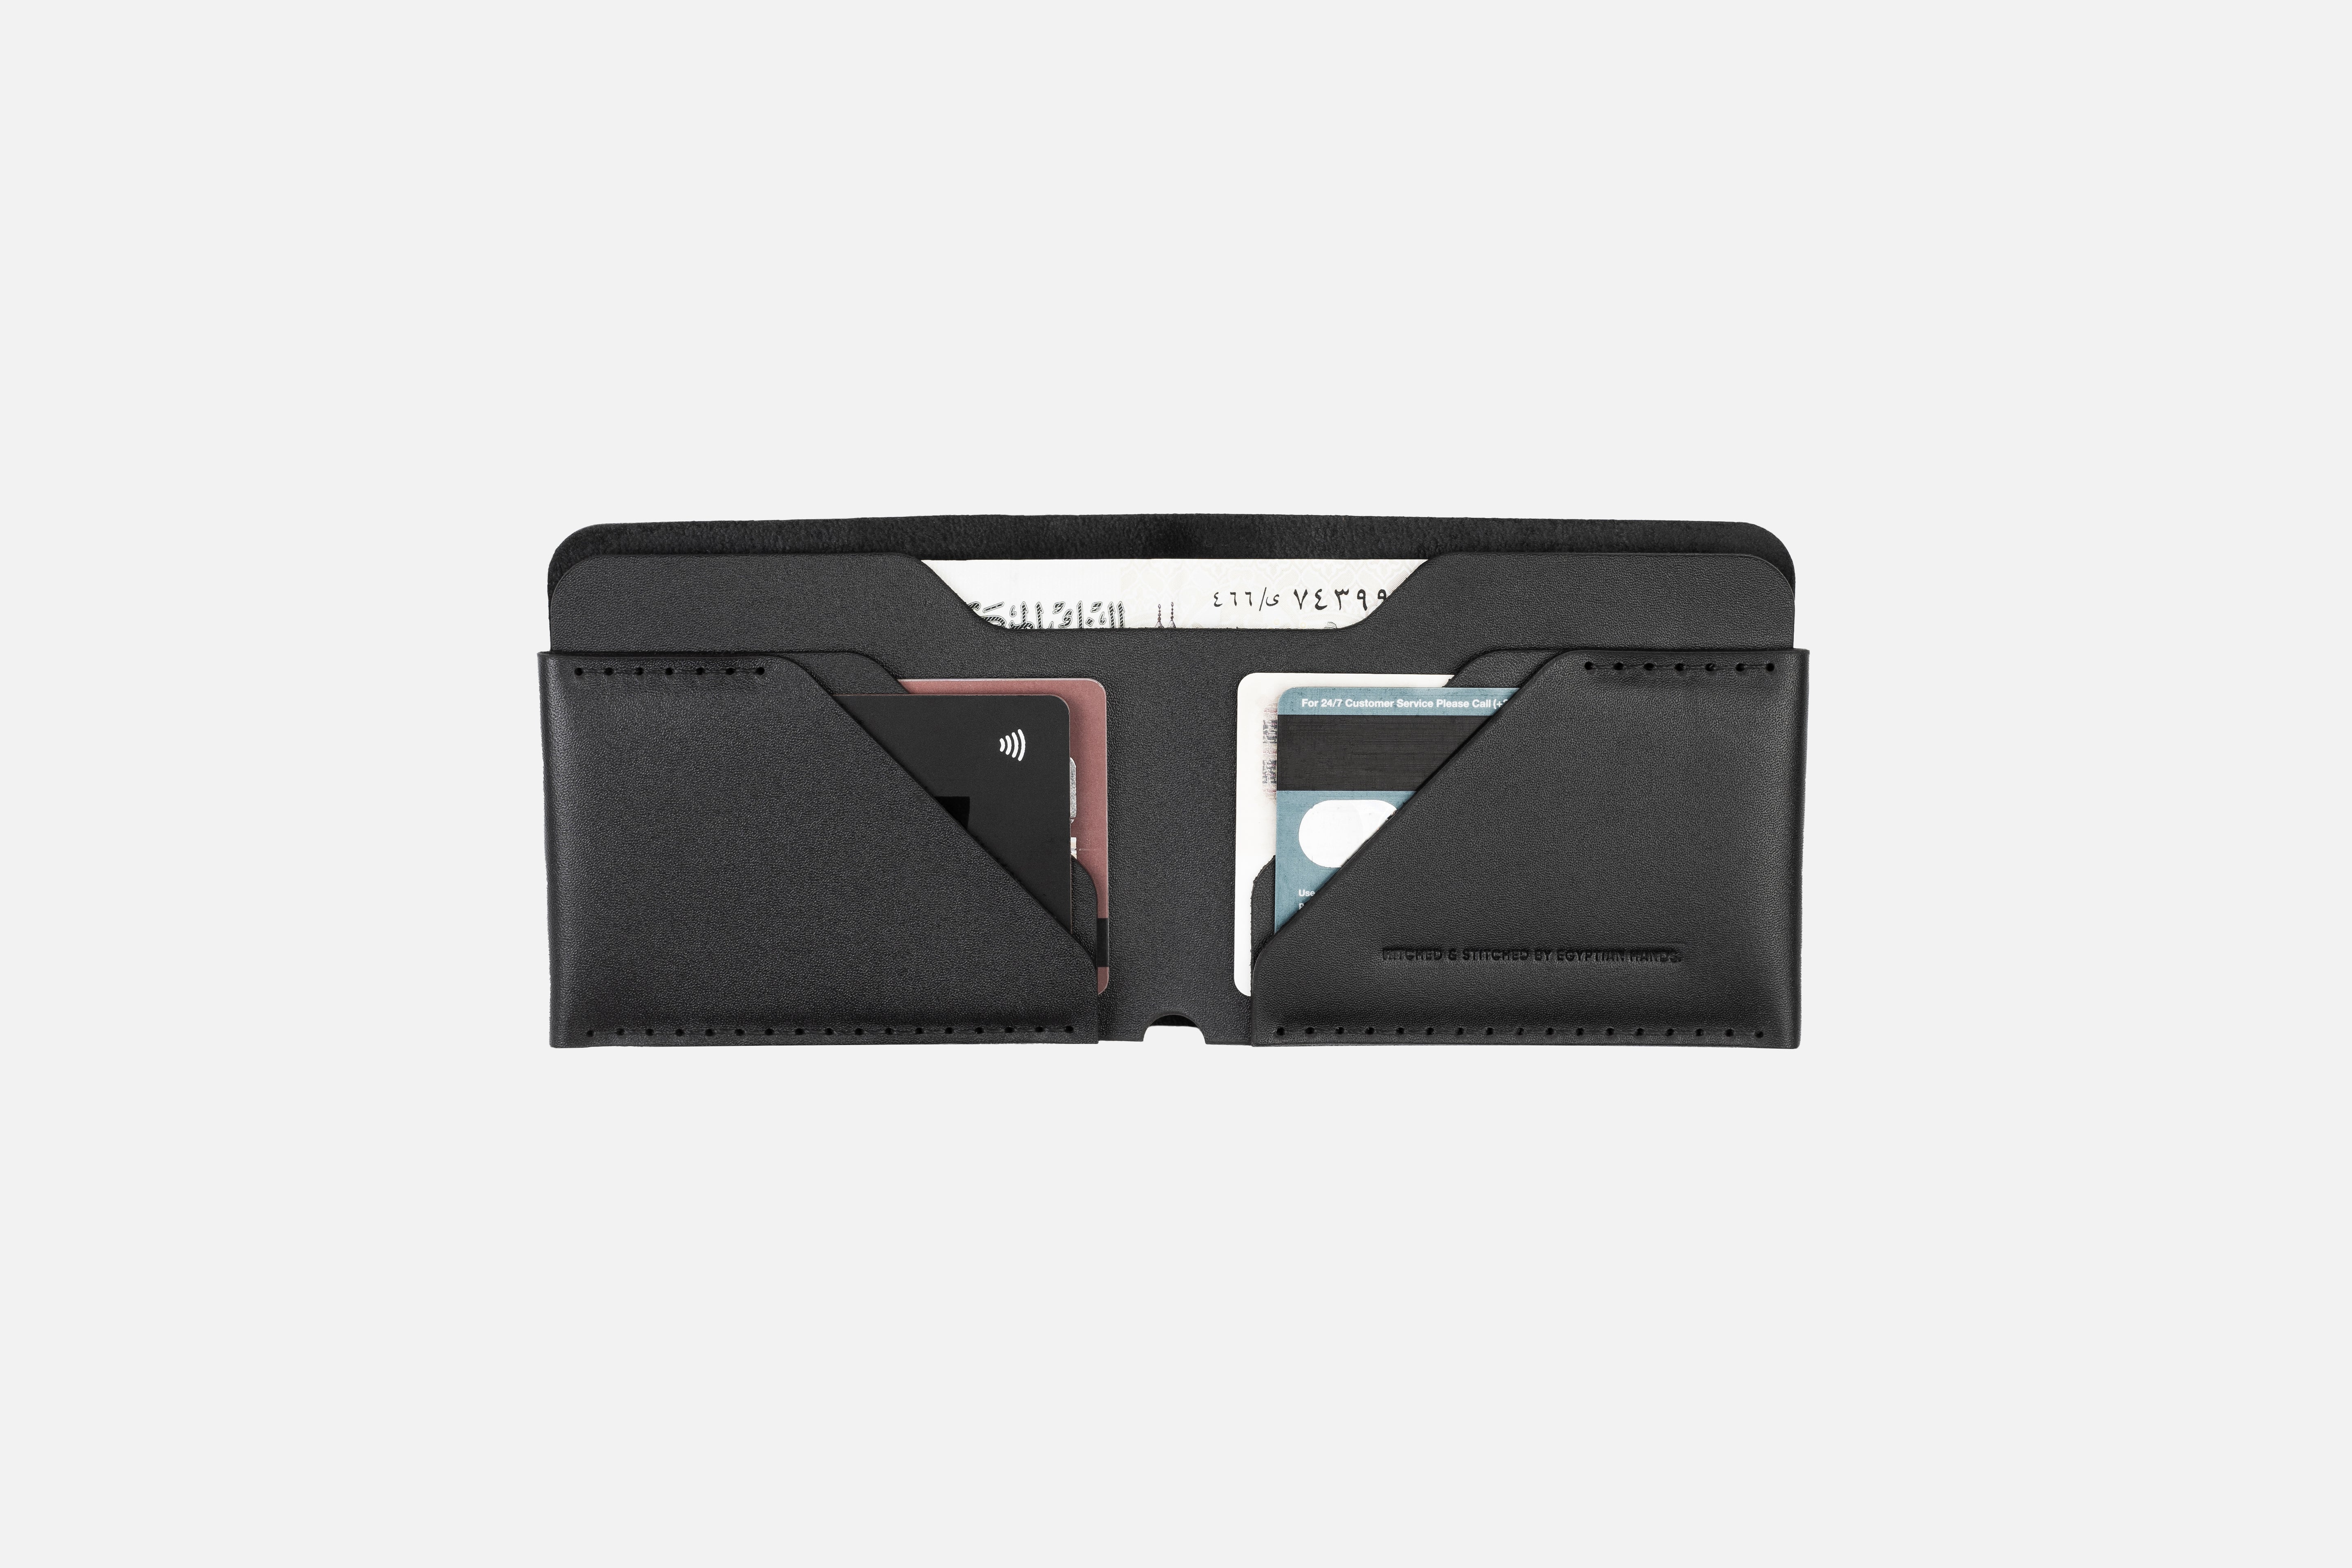 Bifold Cash Wallet Offer | Together you can save more